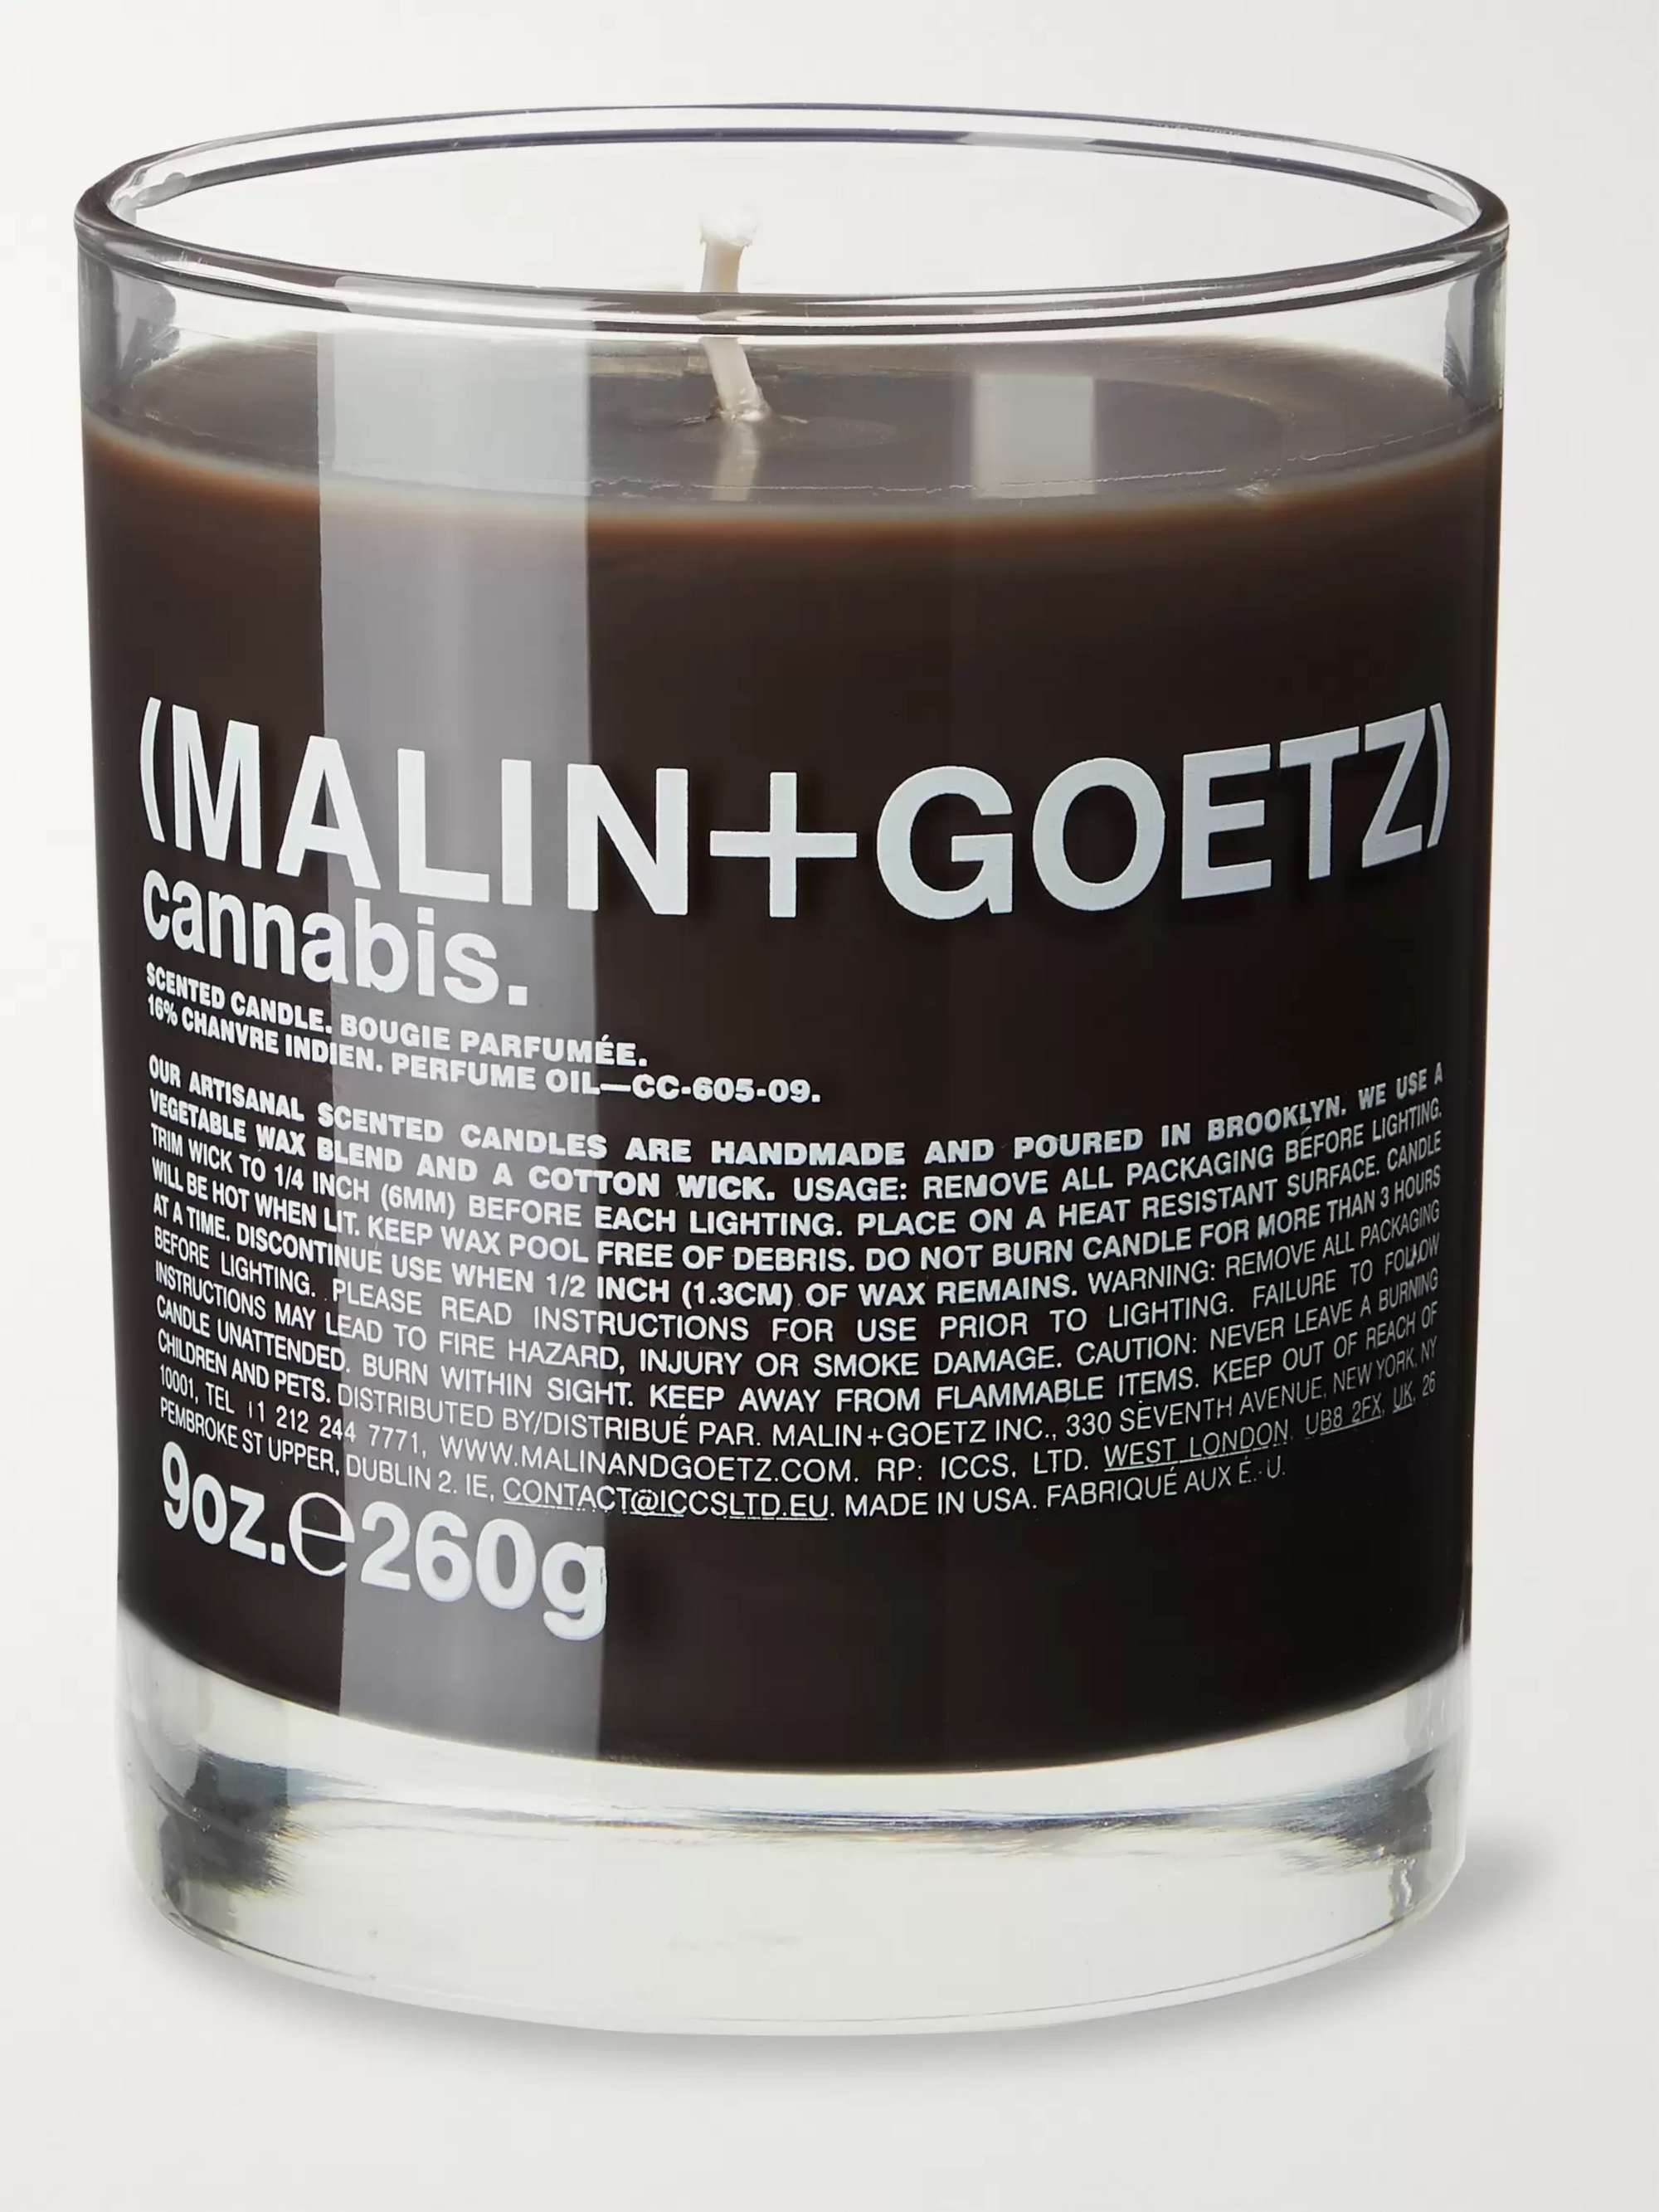 MALIN + GOETZ Cannabis Scented Candle, 260g